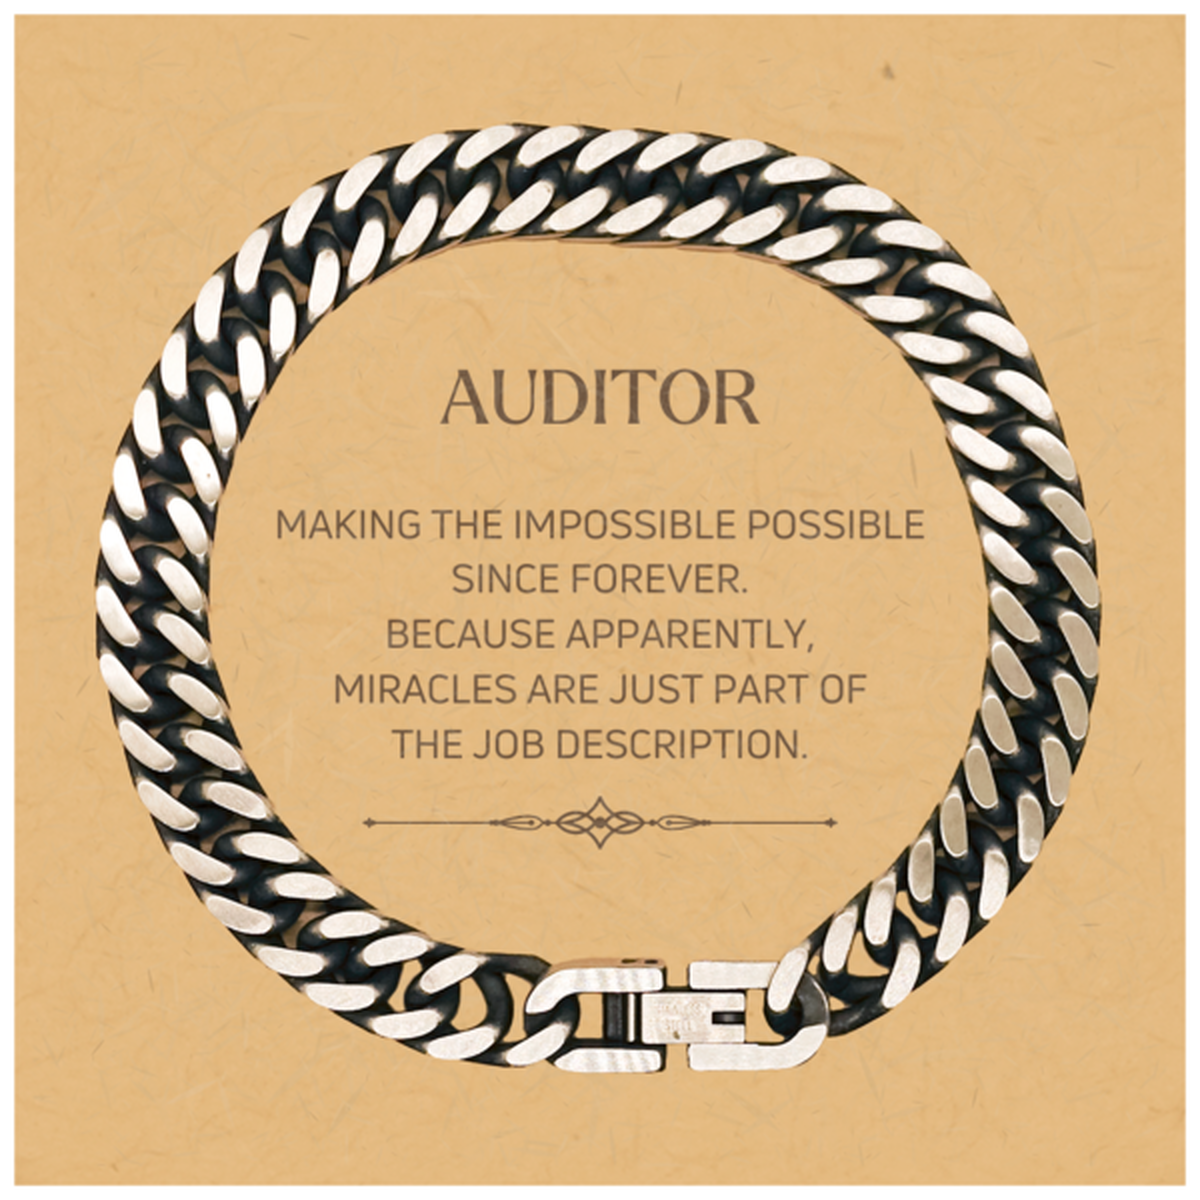 Funny Auditor Gifts, Miracles are just part of the job description, Inspirational Birthday Christmas Cuban Link Chain Bracelet For Auditor, Men, Women, Coworkers, Friends, Boss